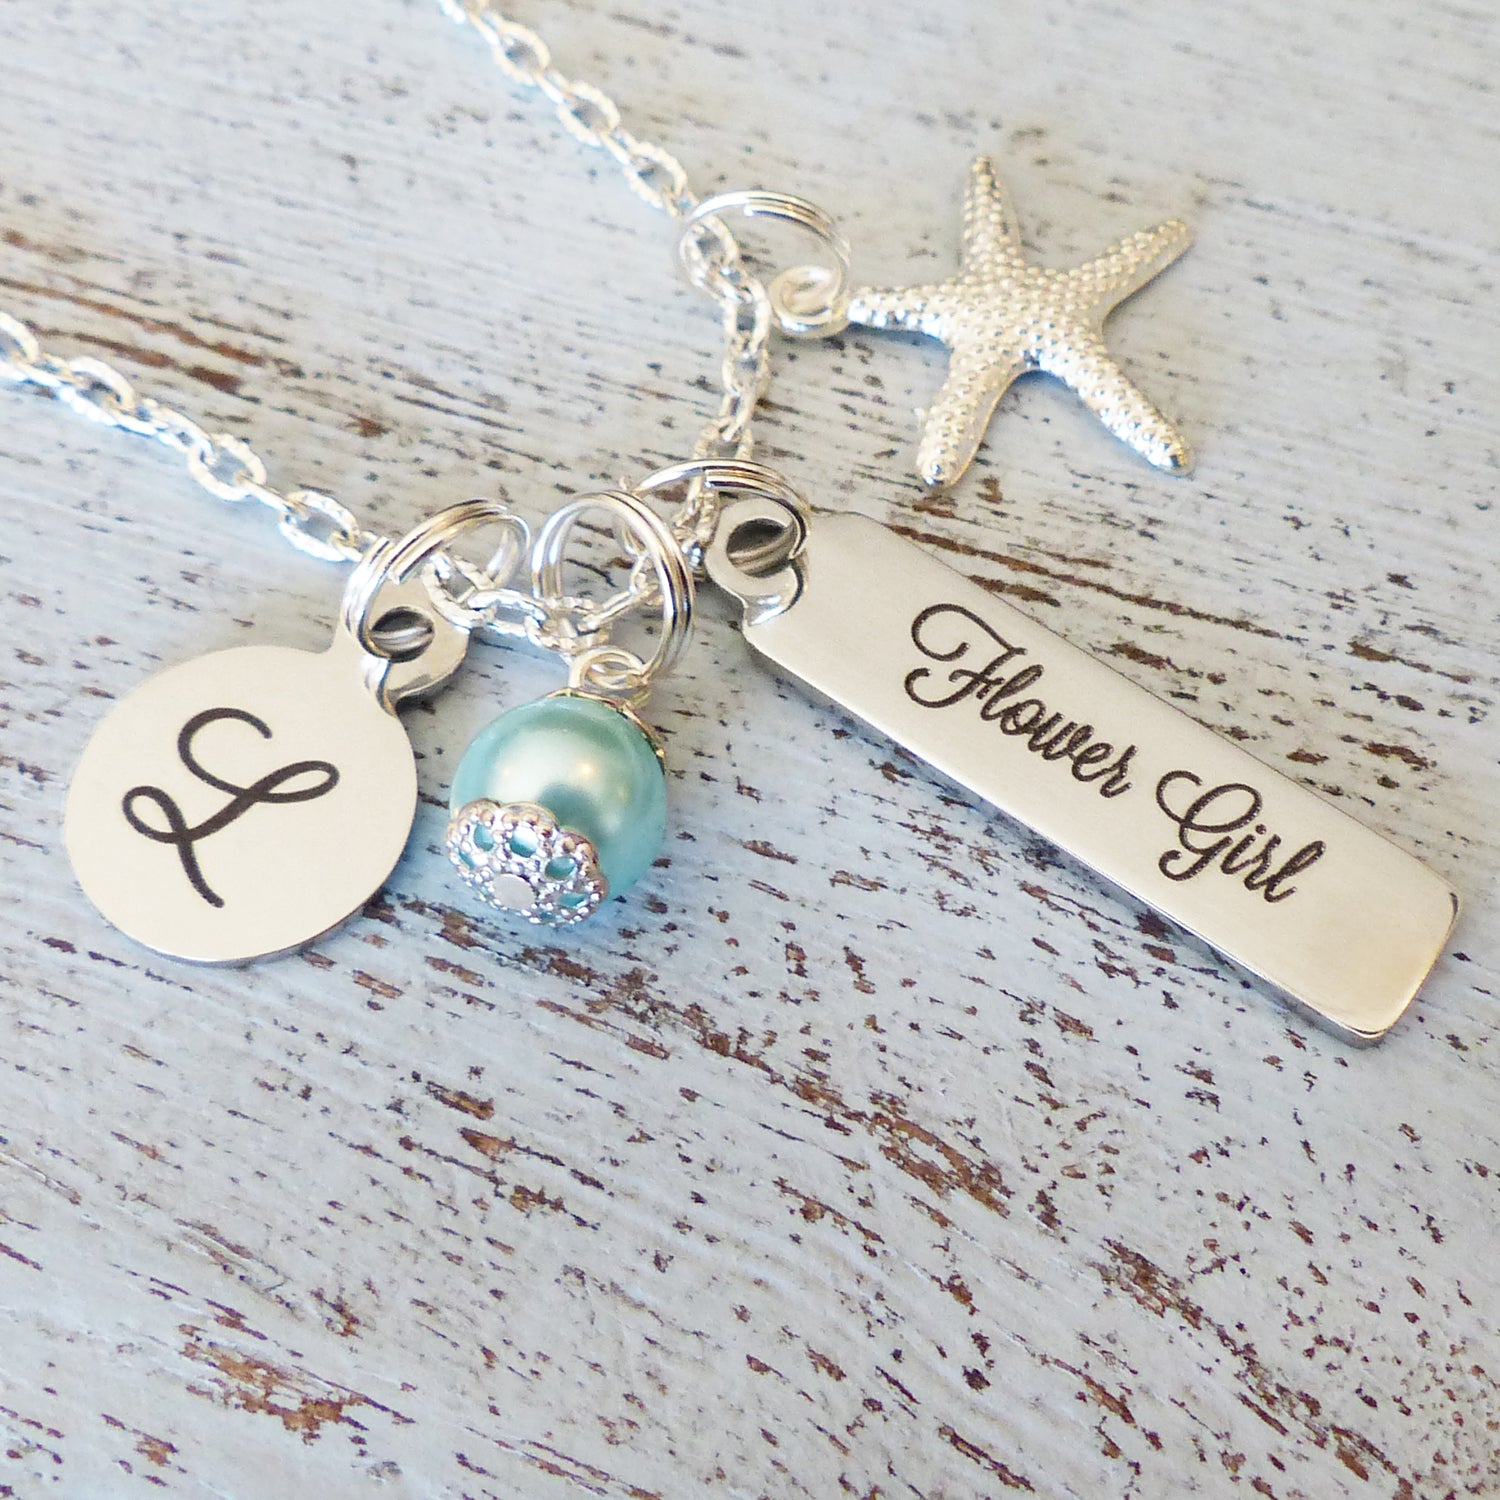 Flower Girl Necklace- Personalized Gift for Flower girl-Bar Necklace-Initial Necklace, Gifts for Flower Girls, Starfish Charm Necklace, Blue